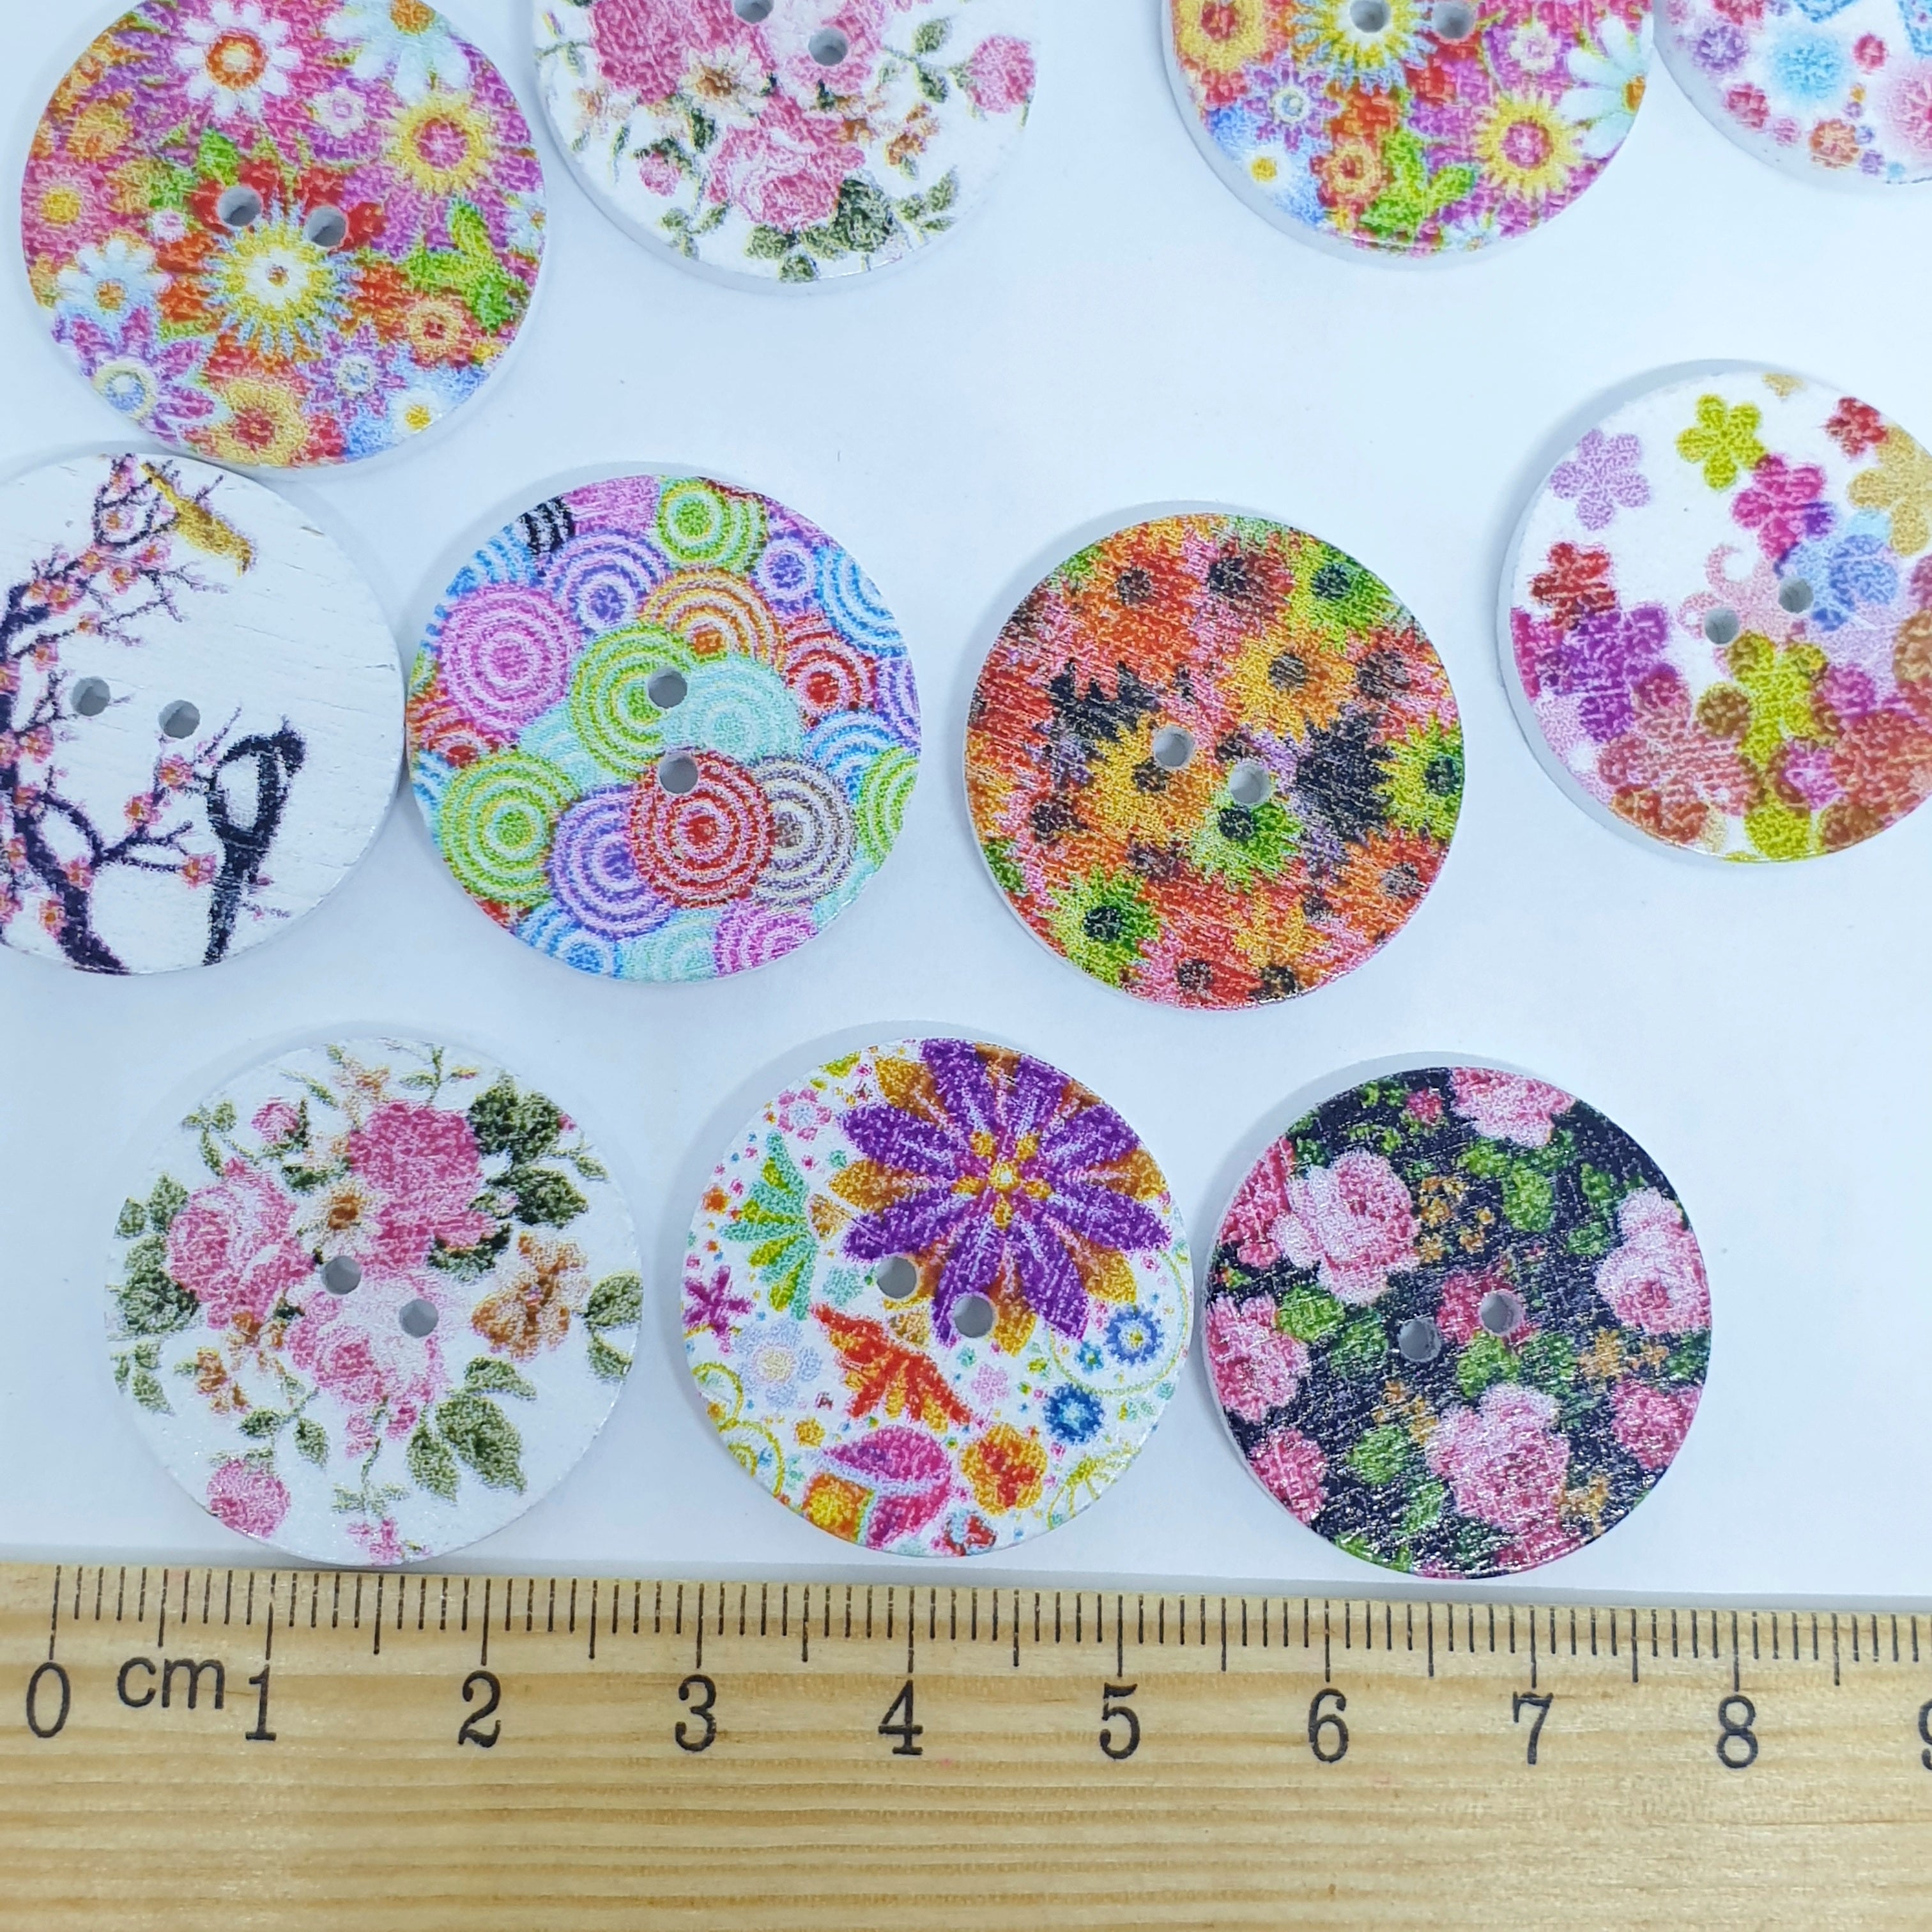 MajorCrafts 24pcs 25mm Mixed Flower Pattern 2 Holes Round Wooden Sewing Buttons